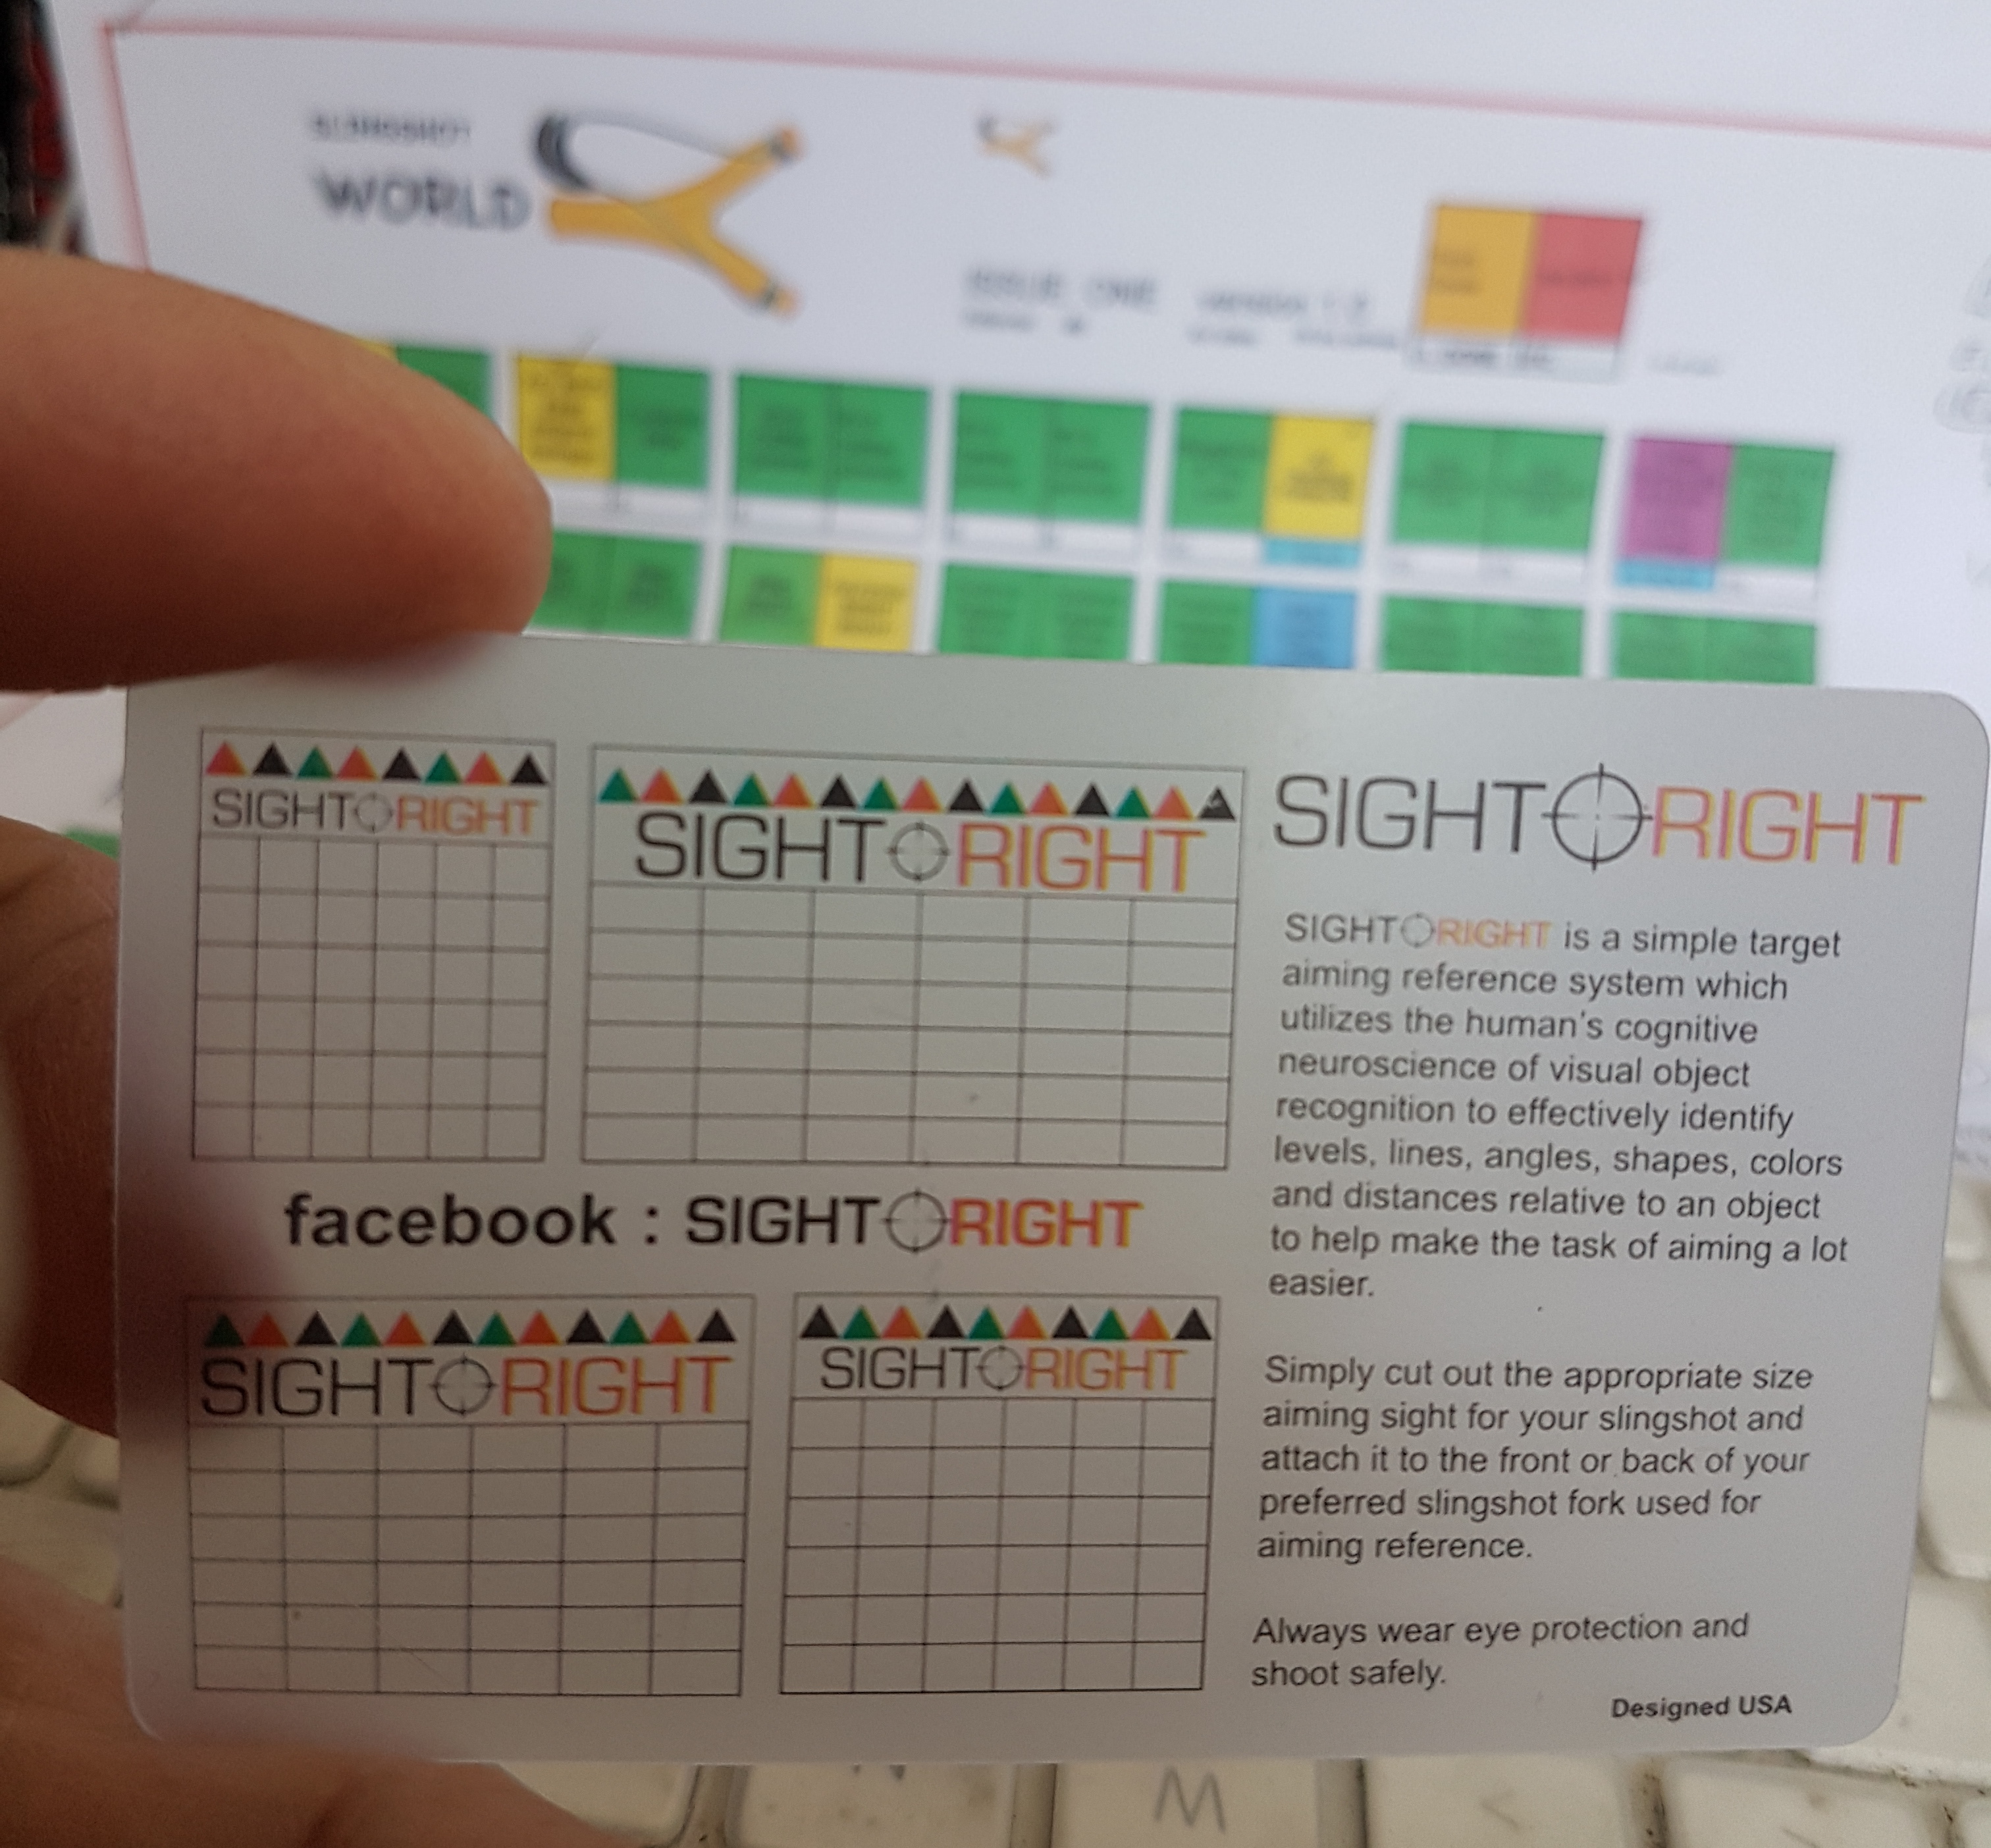 SIGHTRIGHT Simple Aiming System For Slingshots